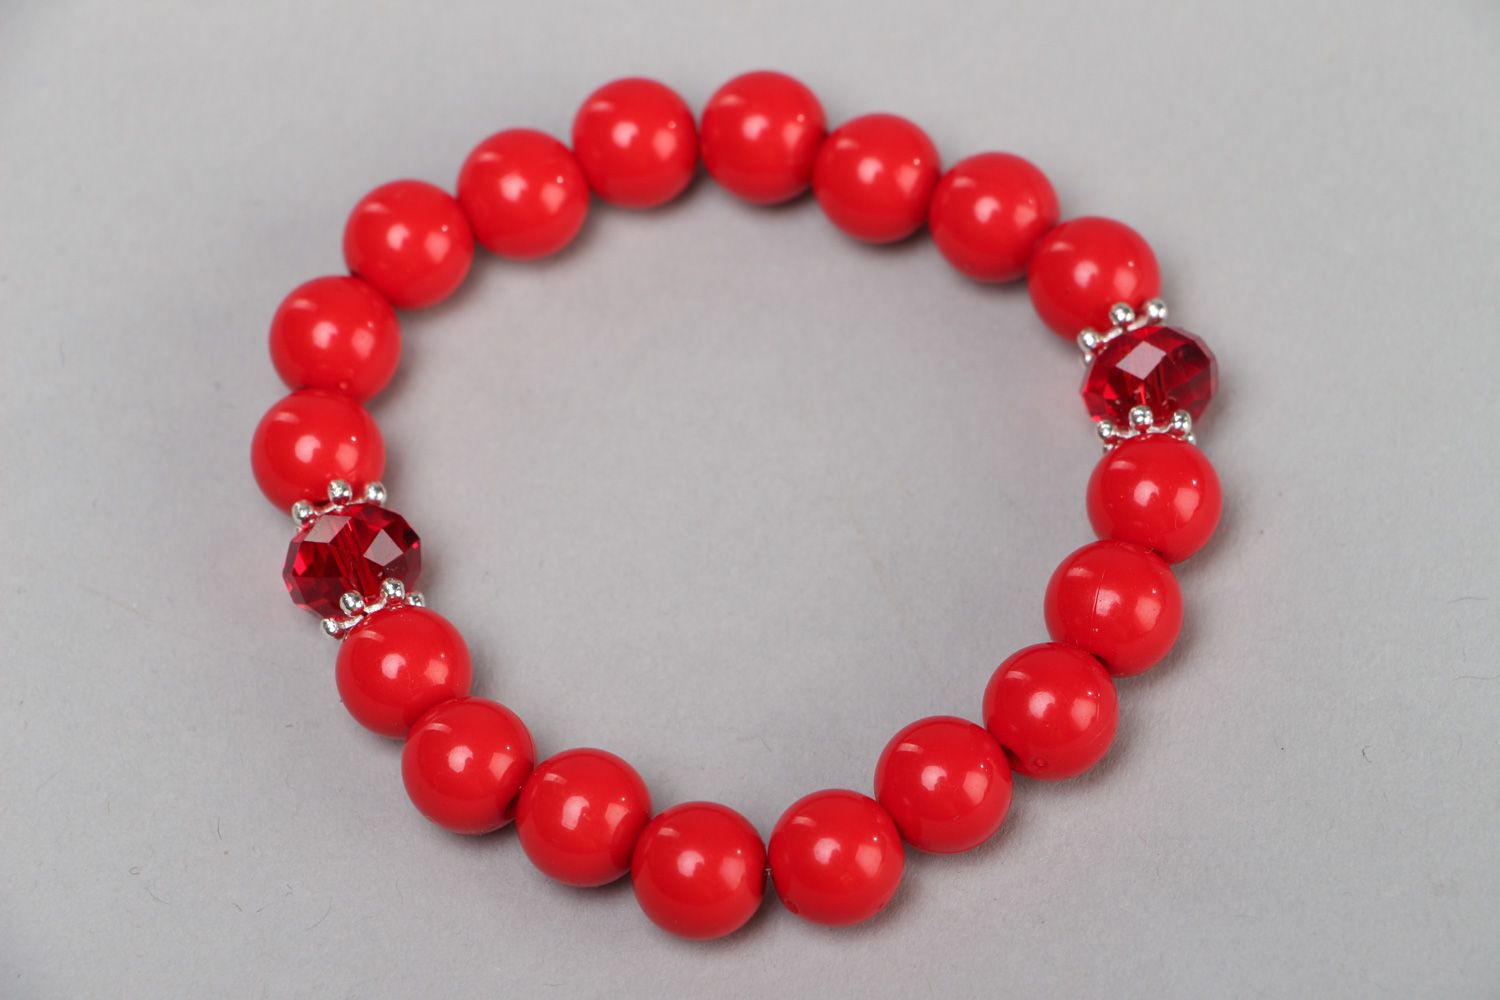 Handmade wrist bracelet with bright red plastic and glass beads for women photo 2